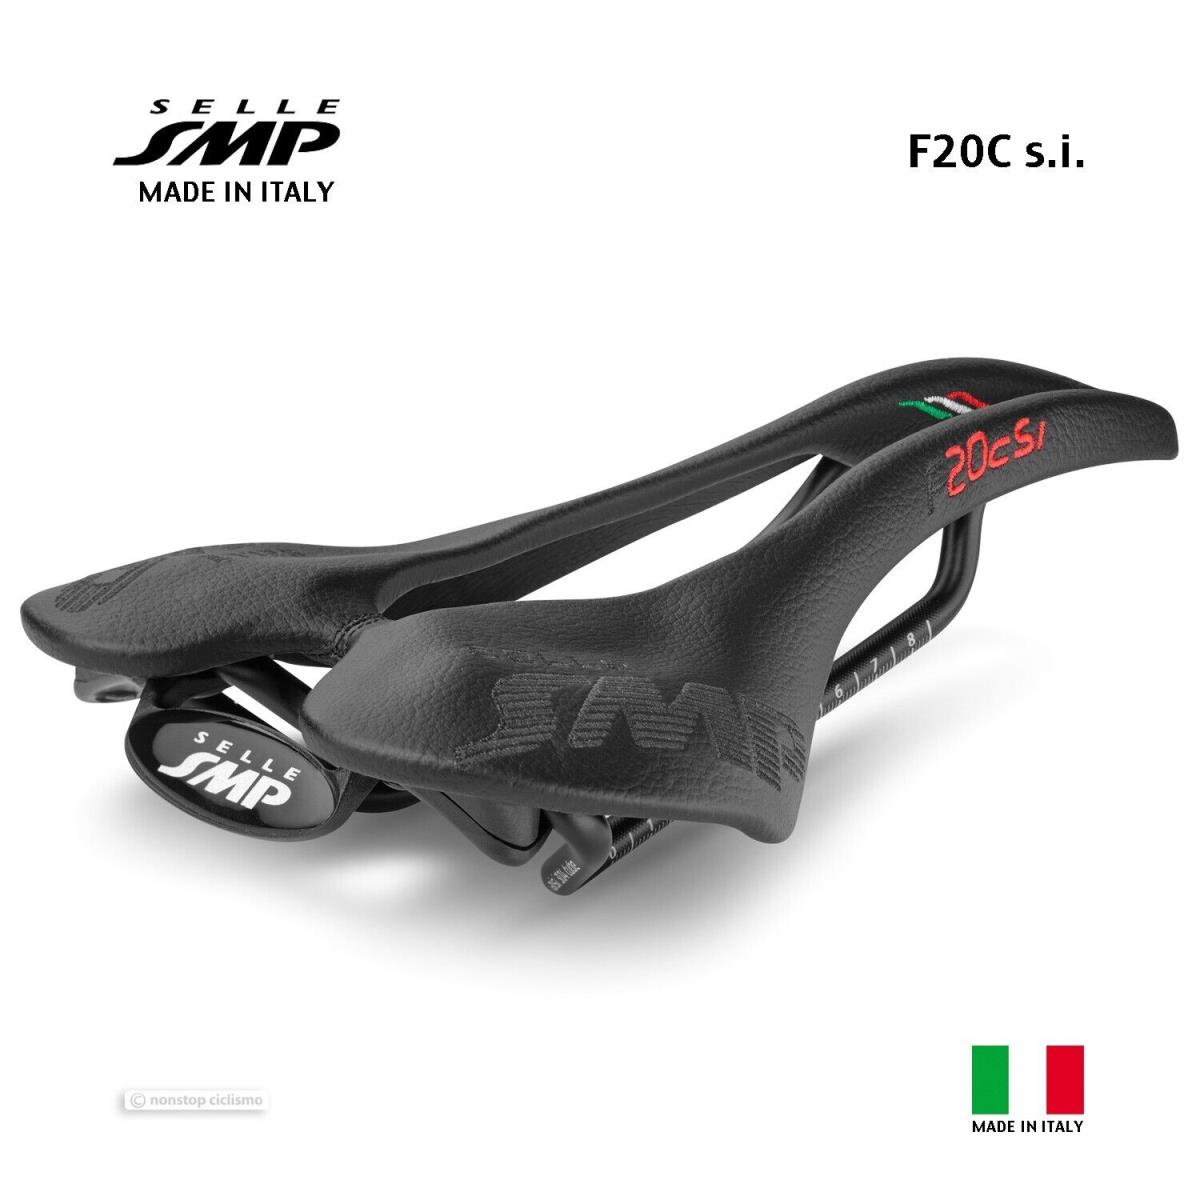 Selle Smp F20Csi Saddle : Black - Made IN Italy